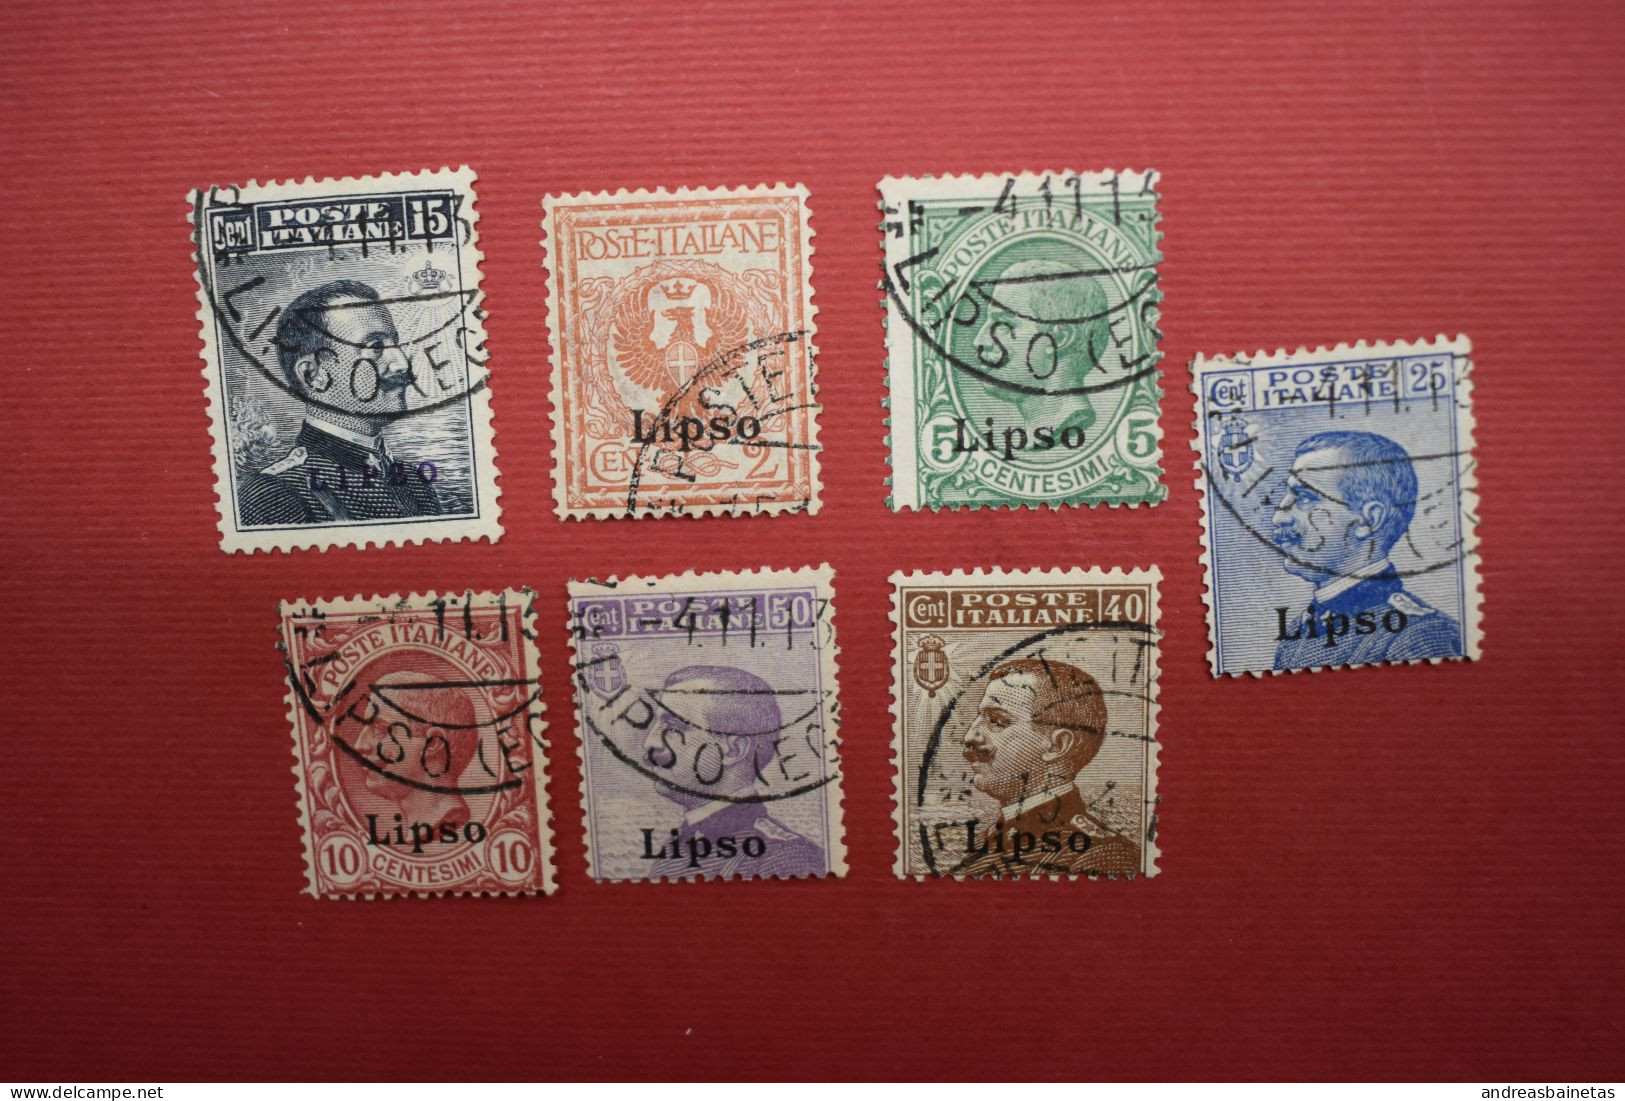 Stamps Greece ITALIAN OCCUPATION - ITALIAN POST 1912 "LIPSO" Ovpt, Complete Set Of 7 Values Used (Hellas 3VII/9VII). - Dodecanese